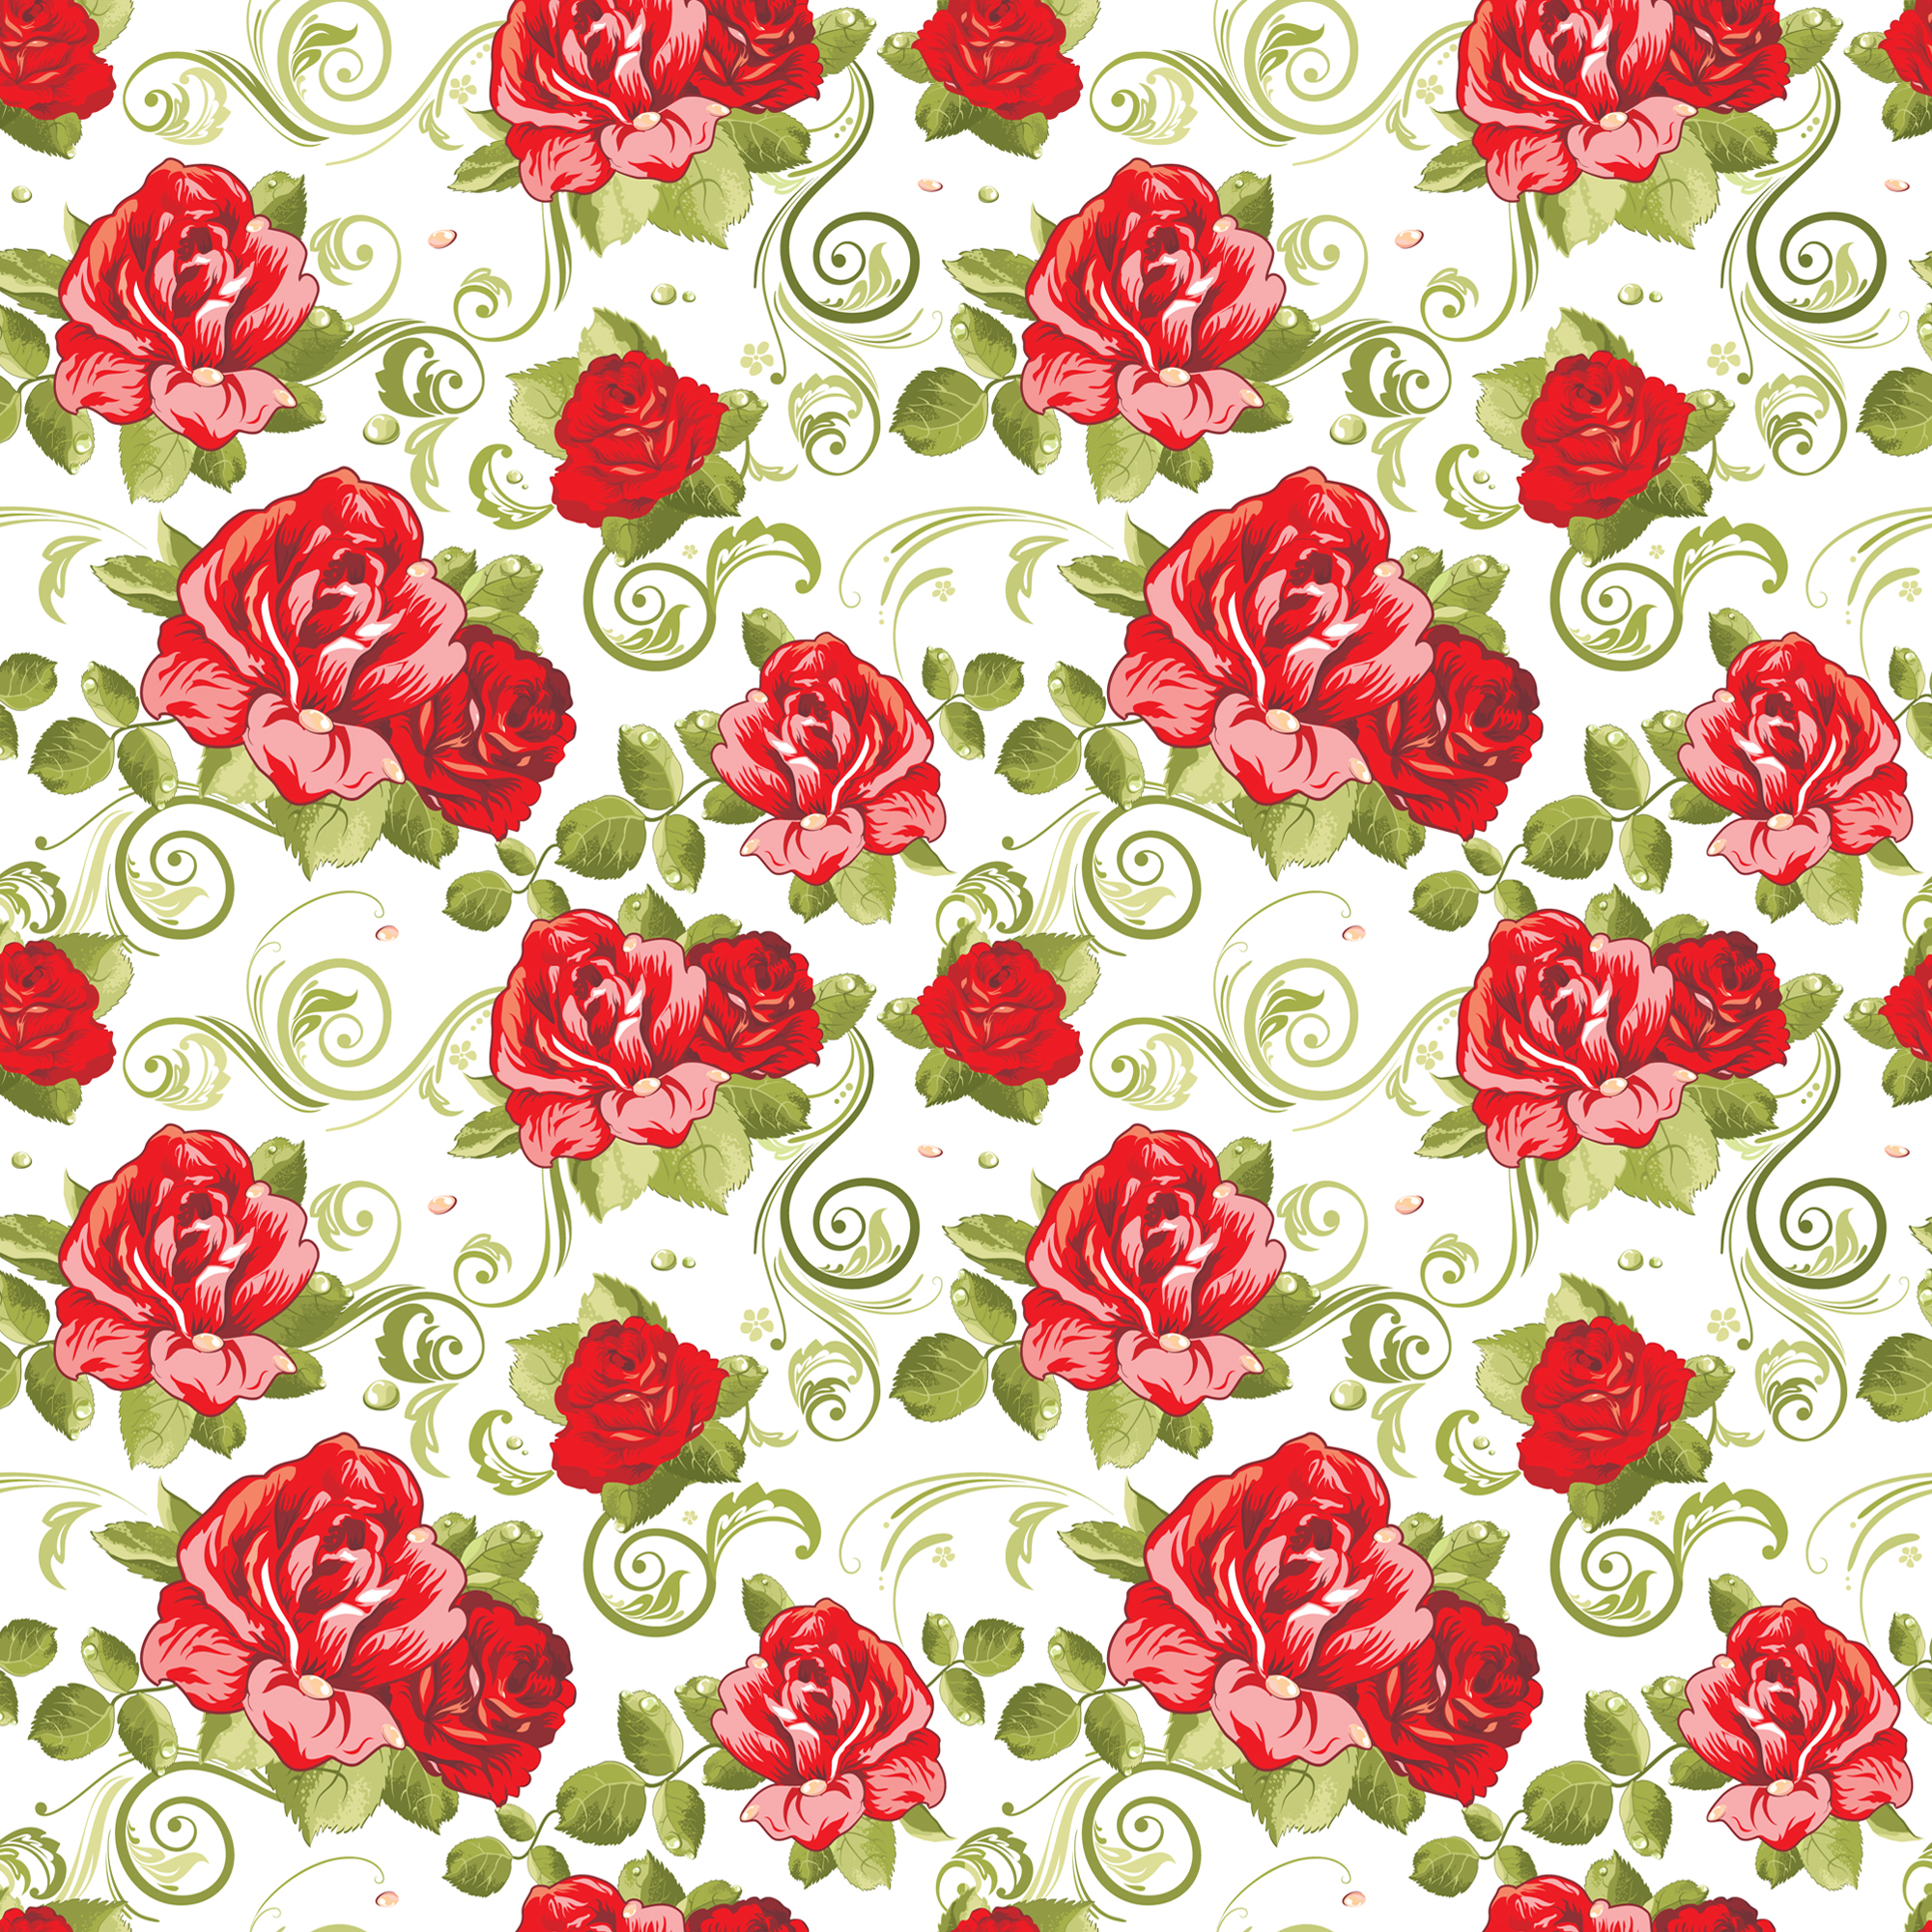 wallpapers background, pictures, roses, flowers, patterns